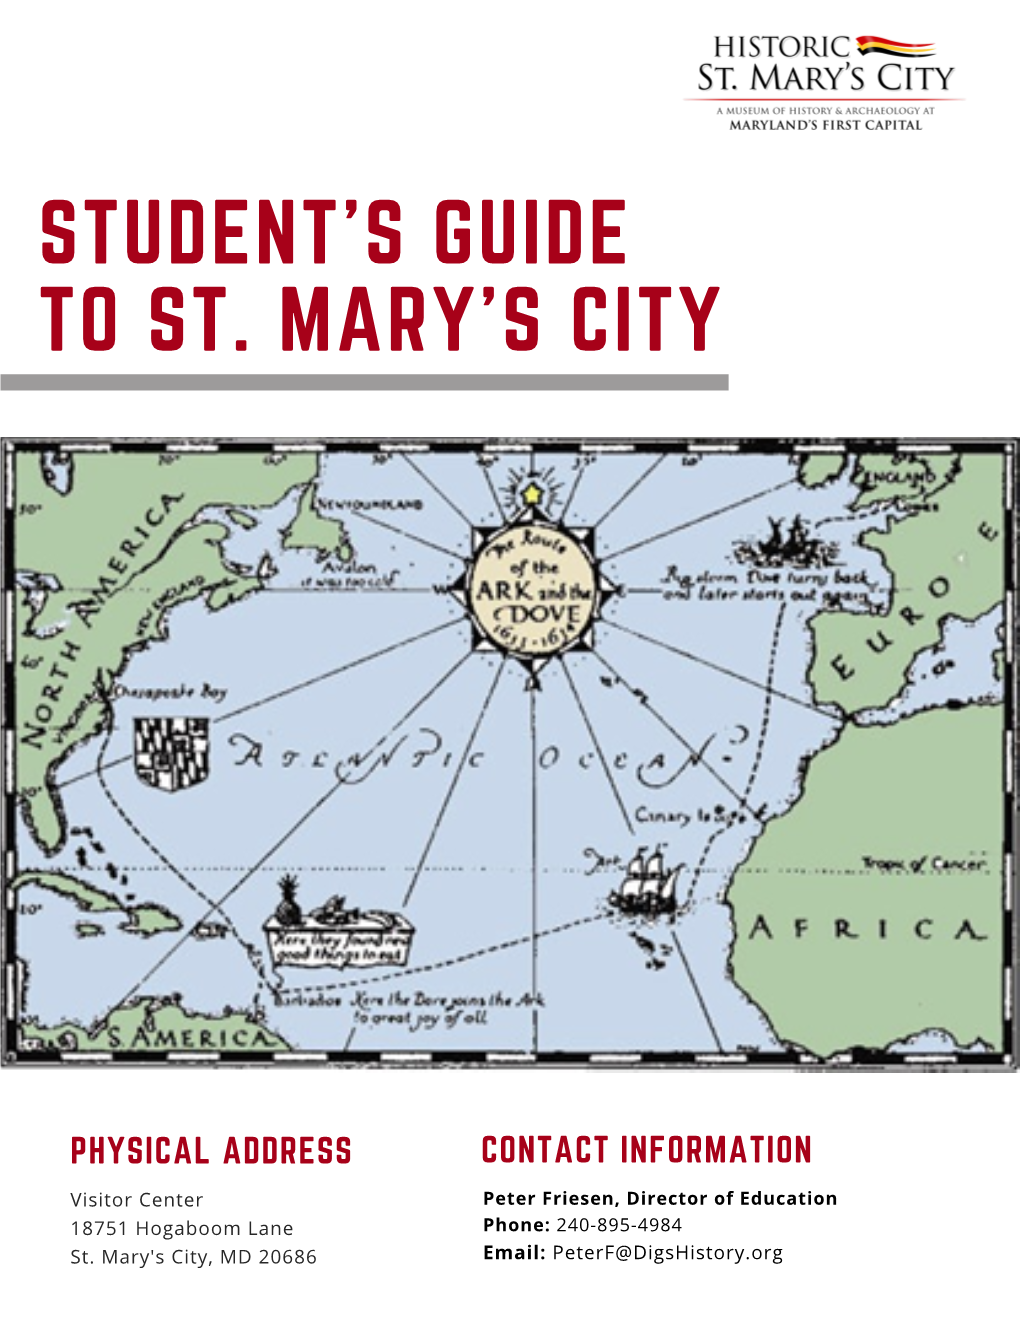 Student's Guide to St. Mary's City